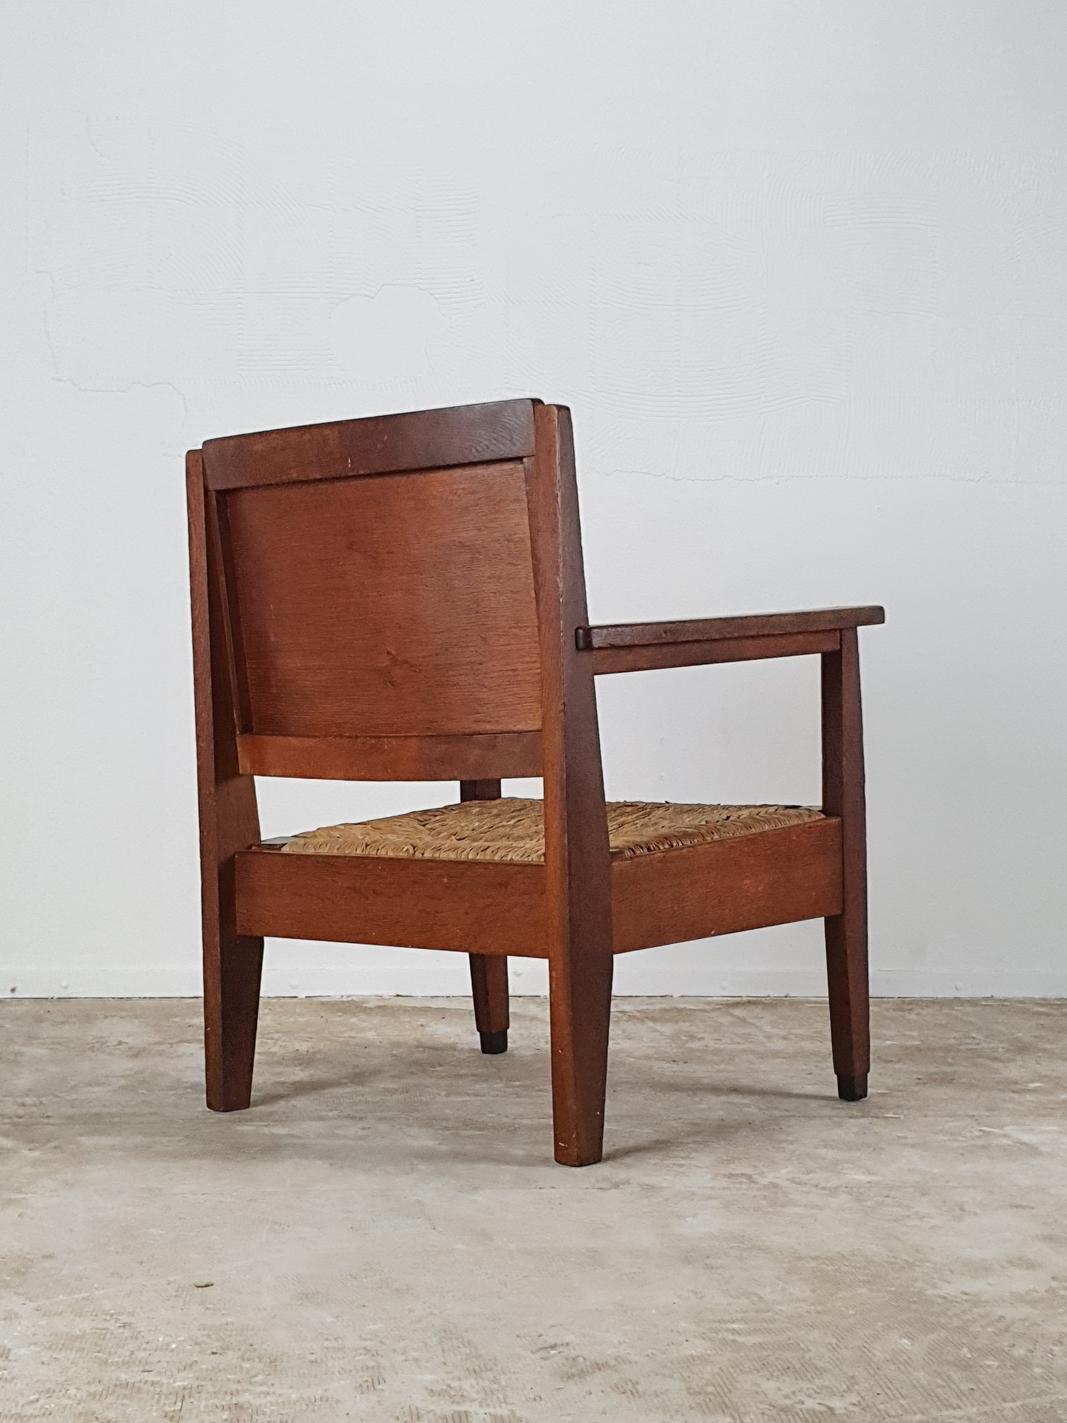 Dutch Low Chair by Frits Spanjaard 'Attributed'